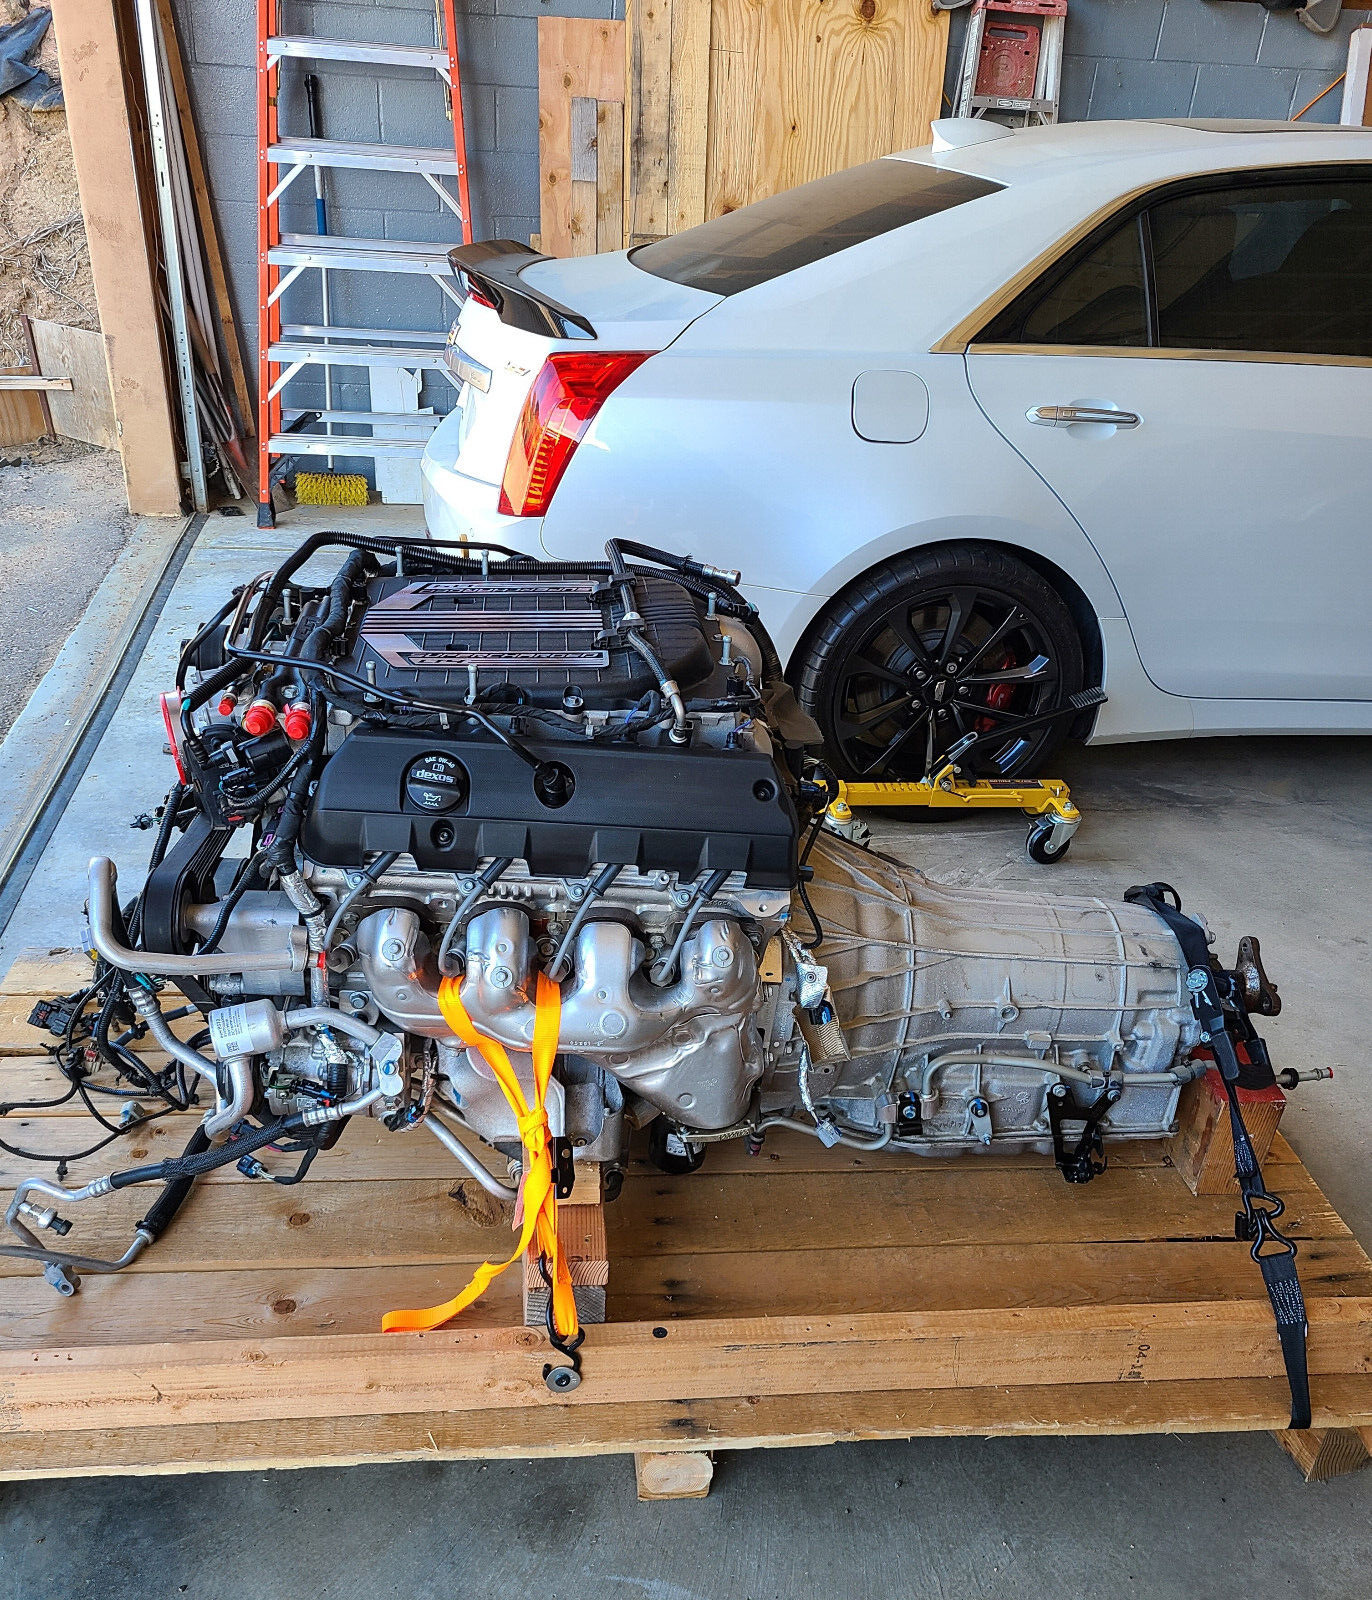 2019 Cadillac CTS-V engine and 8 speed auto transmission, 27k miles